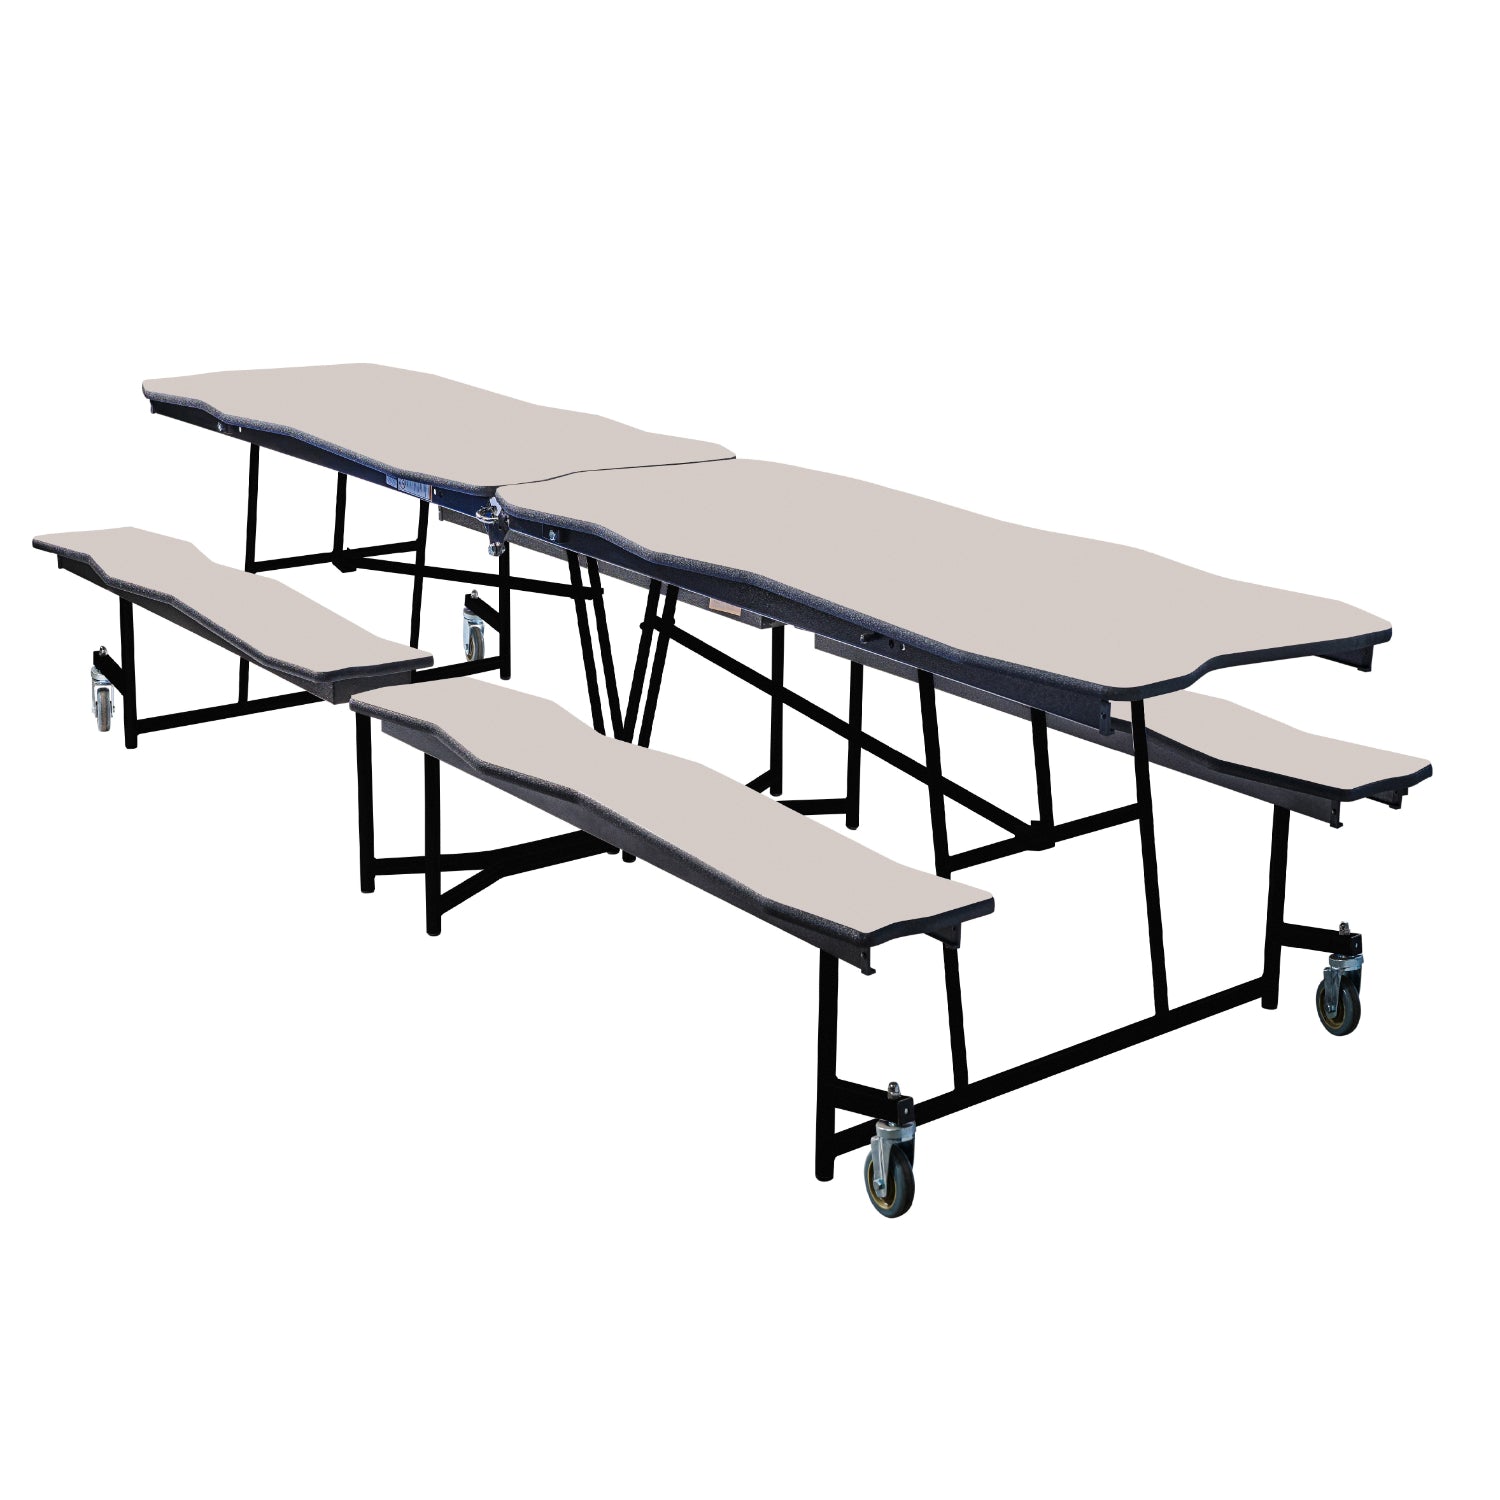 Mobile Cafeteria Table with Benches, 8' Bedrock, Plywood Core, Vinyl T-Mold Edge, Textured Black Frame